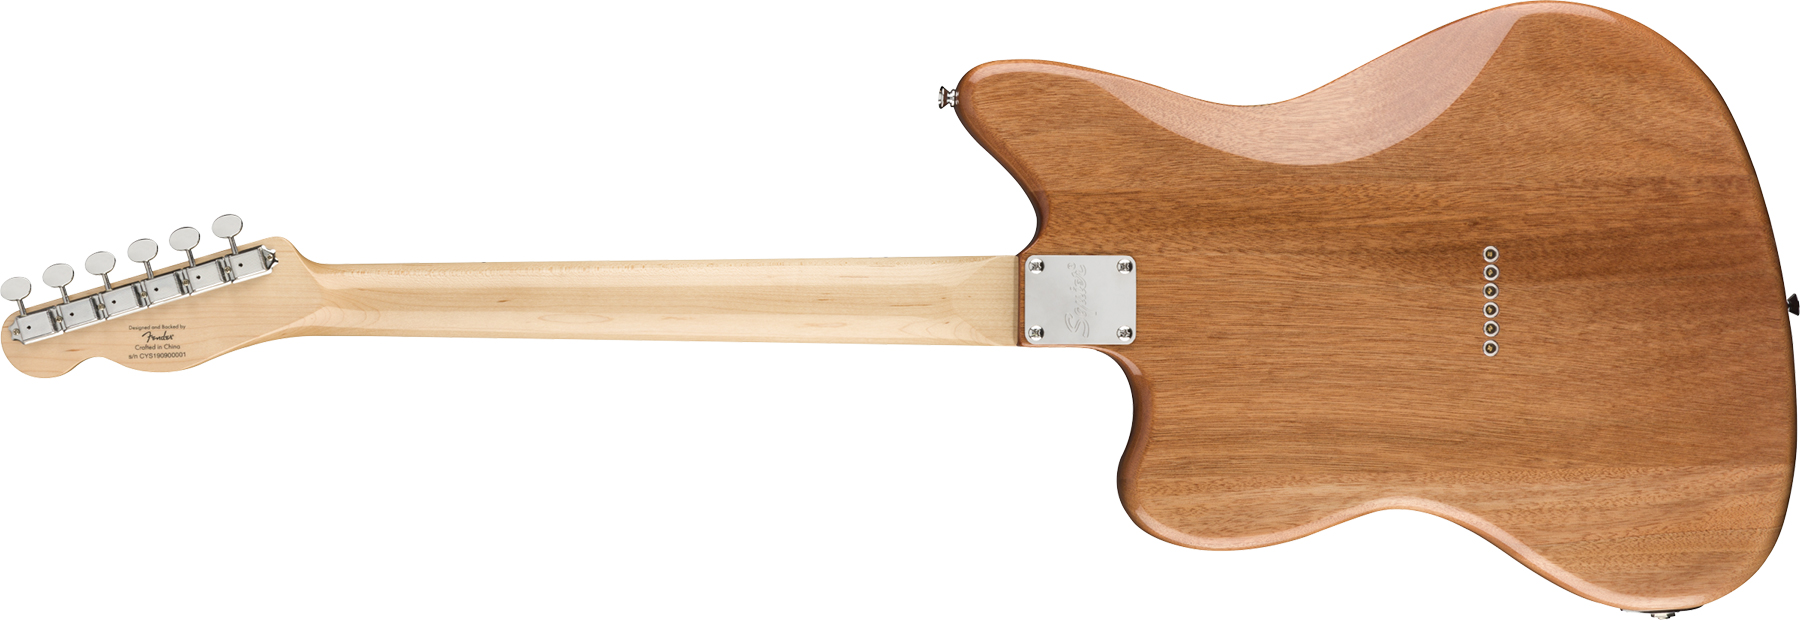 Squier Tele Offset Paranormal Ss Ht Mn - Natural - Guitarra electrica retro rock - Variation 1